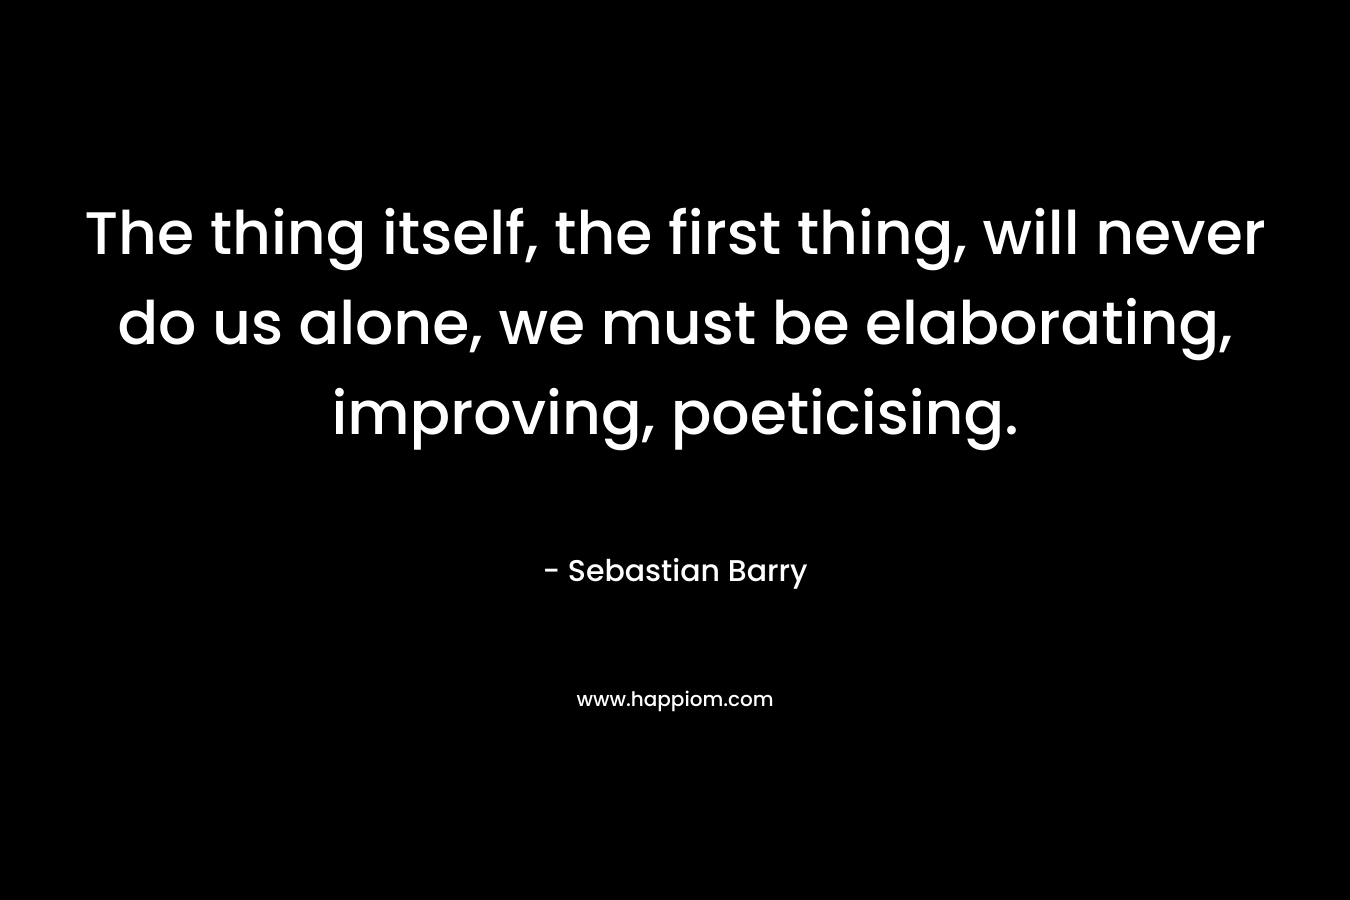 The thing itself, the first thing, will never do us alone, we must be elaborating, improving, poeticising. – Sebastian Barry